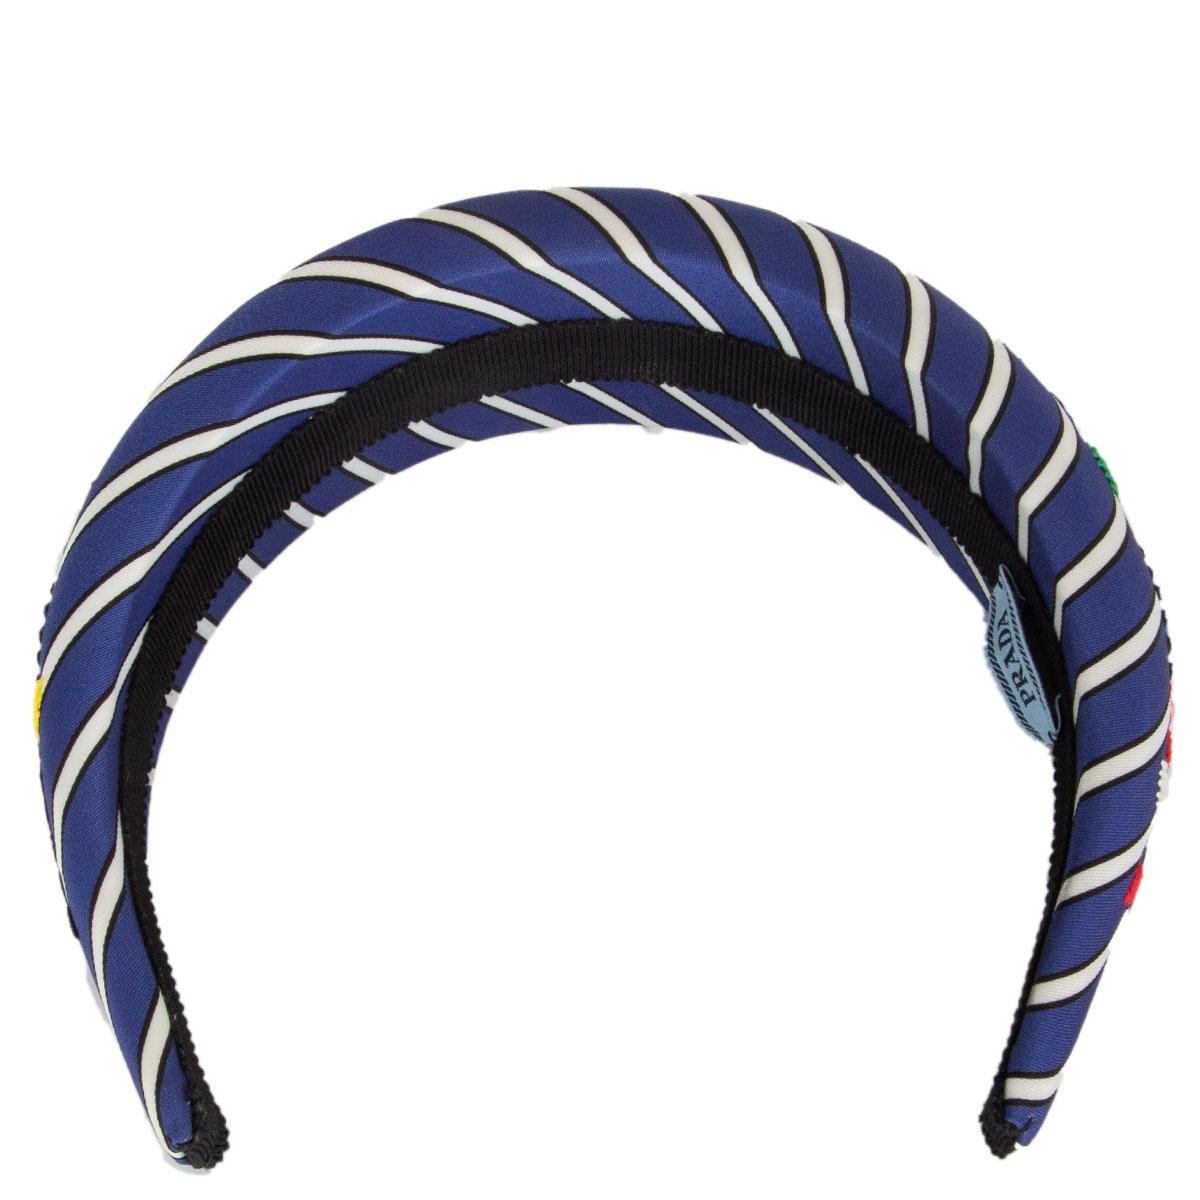 100% authentic Prada striped satin headband in blue and white with red, rose, green and yellow flower embroidery. Has been worn and is in excellent condition. 

All our listings include only the listed item unless otherwise specified in the